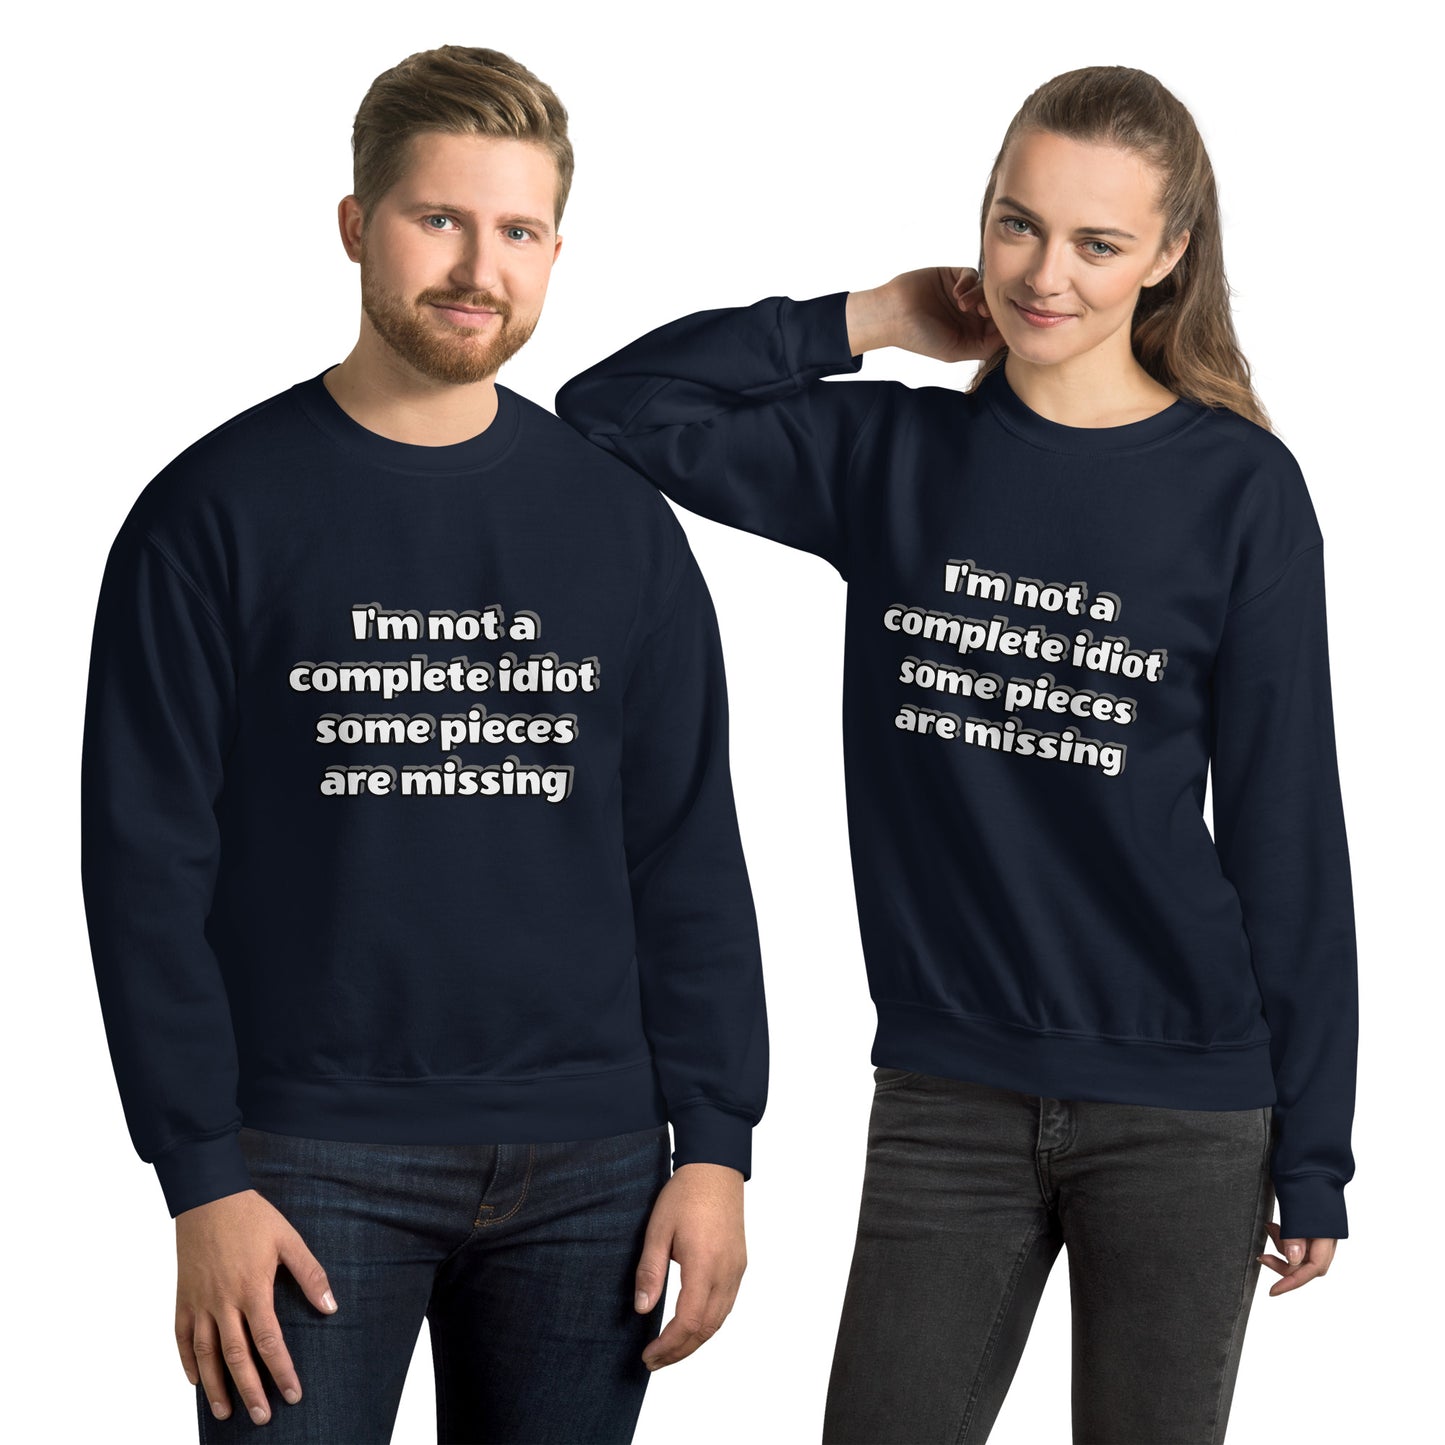 Man and women with navy blue sweatshirt with text “I’m not a complete idiot, some pieces are missing”